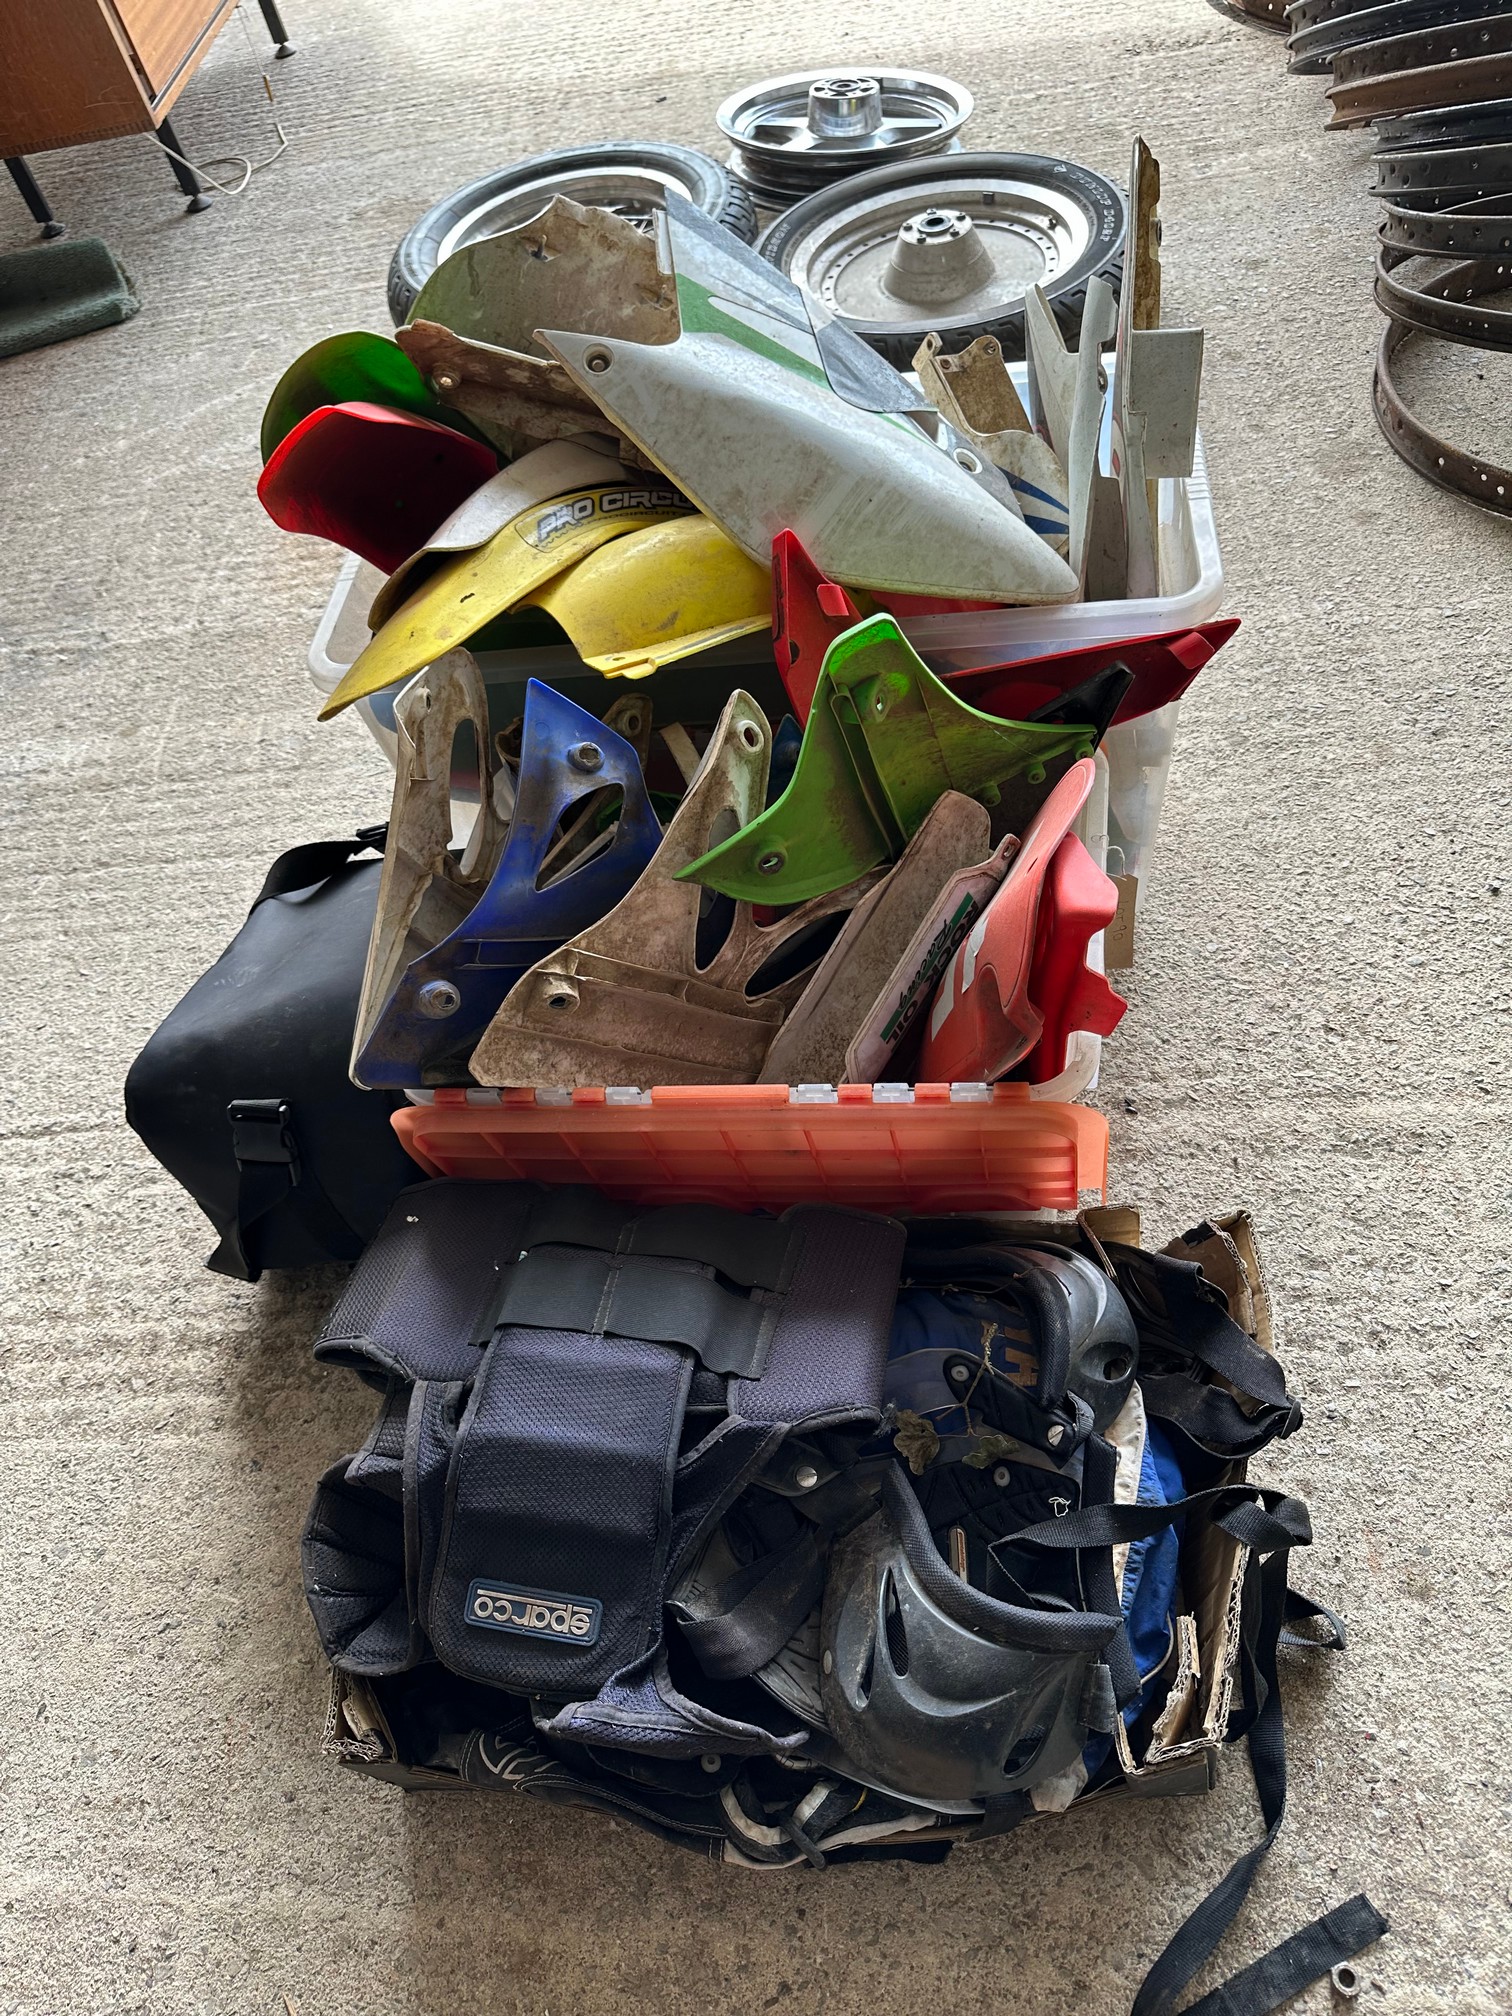 A quantity of used MX motorbike plastic mudguards, number holders, covers and body protectors.